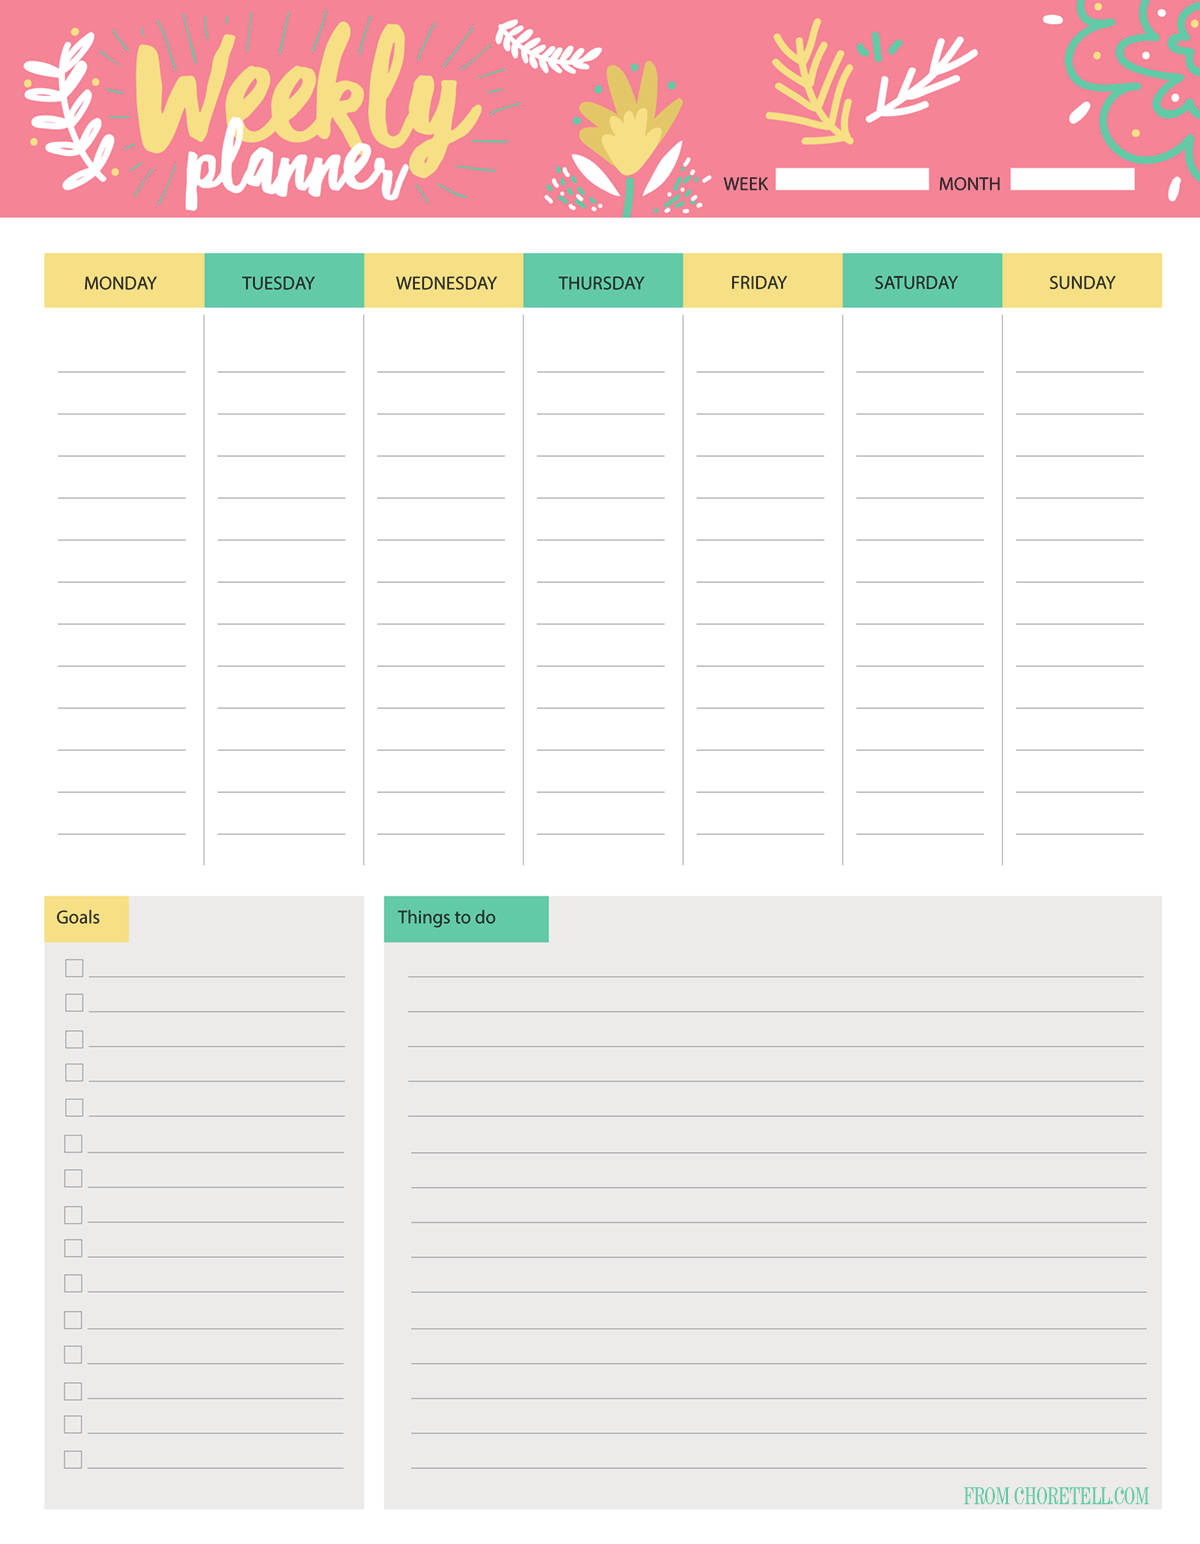 Weekly Planner To do List Free Download Free Printable Downloads 